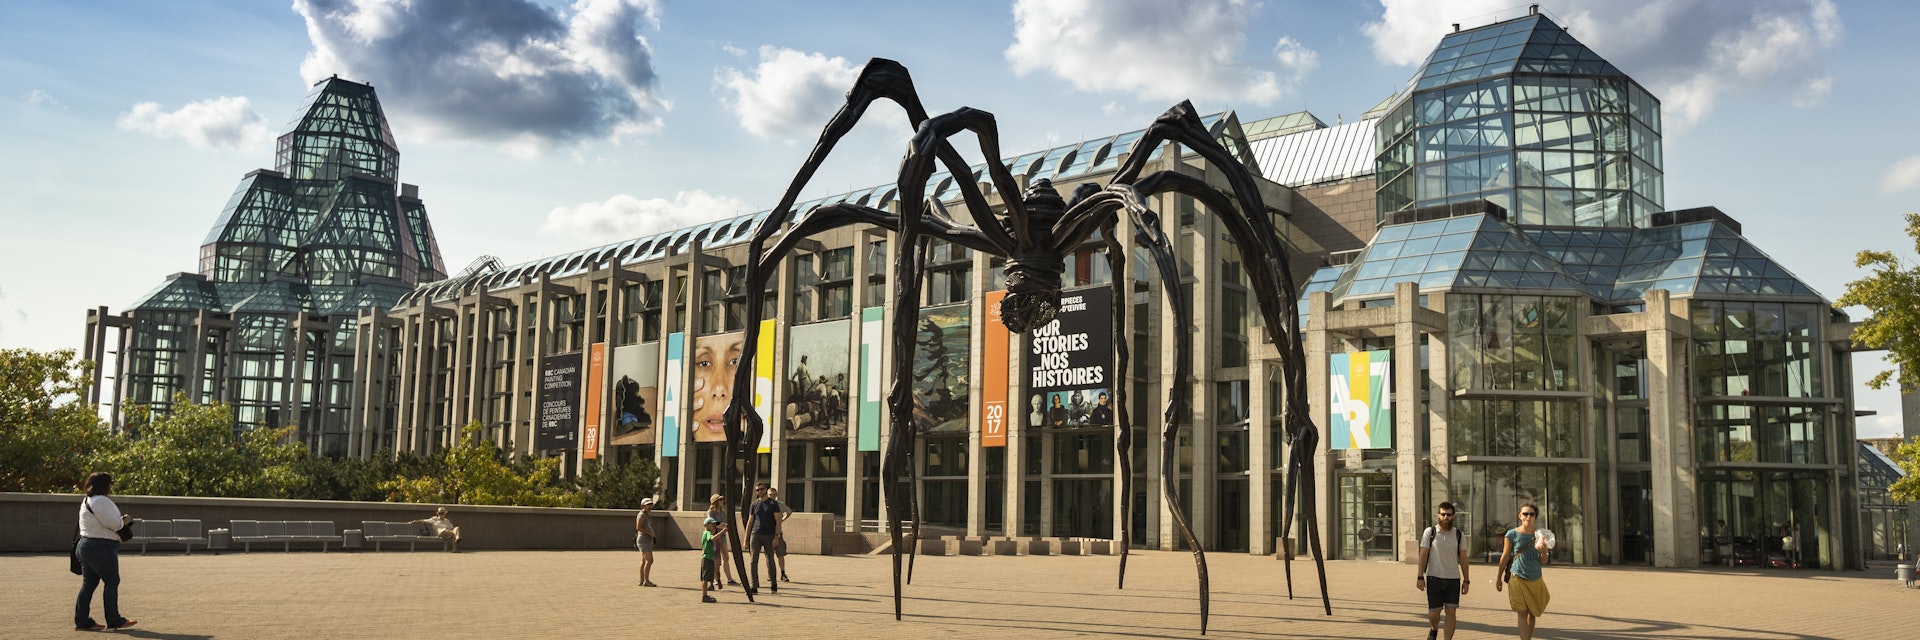 Ottawa, Canada - September 17, 2017:  Maman (1999) is a bronze, stainless steel, and marble sculpture by the artist Louise Bourgeois.  It is in front of The National Gallery of Canada, located in the capital city of Ottawa, Ontario, is one of Canada's premier art galleries.
960641114